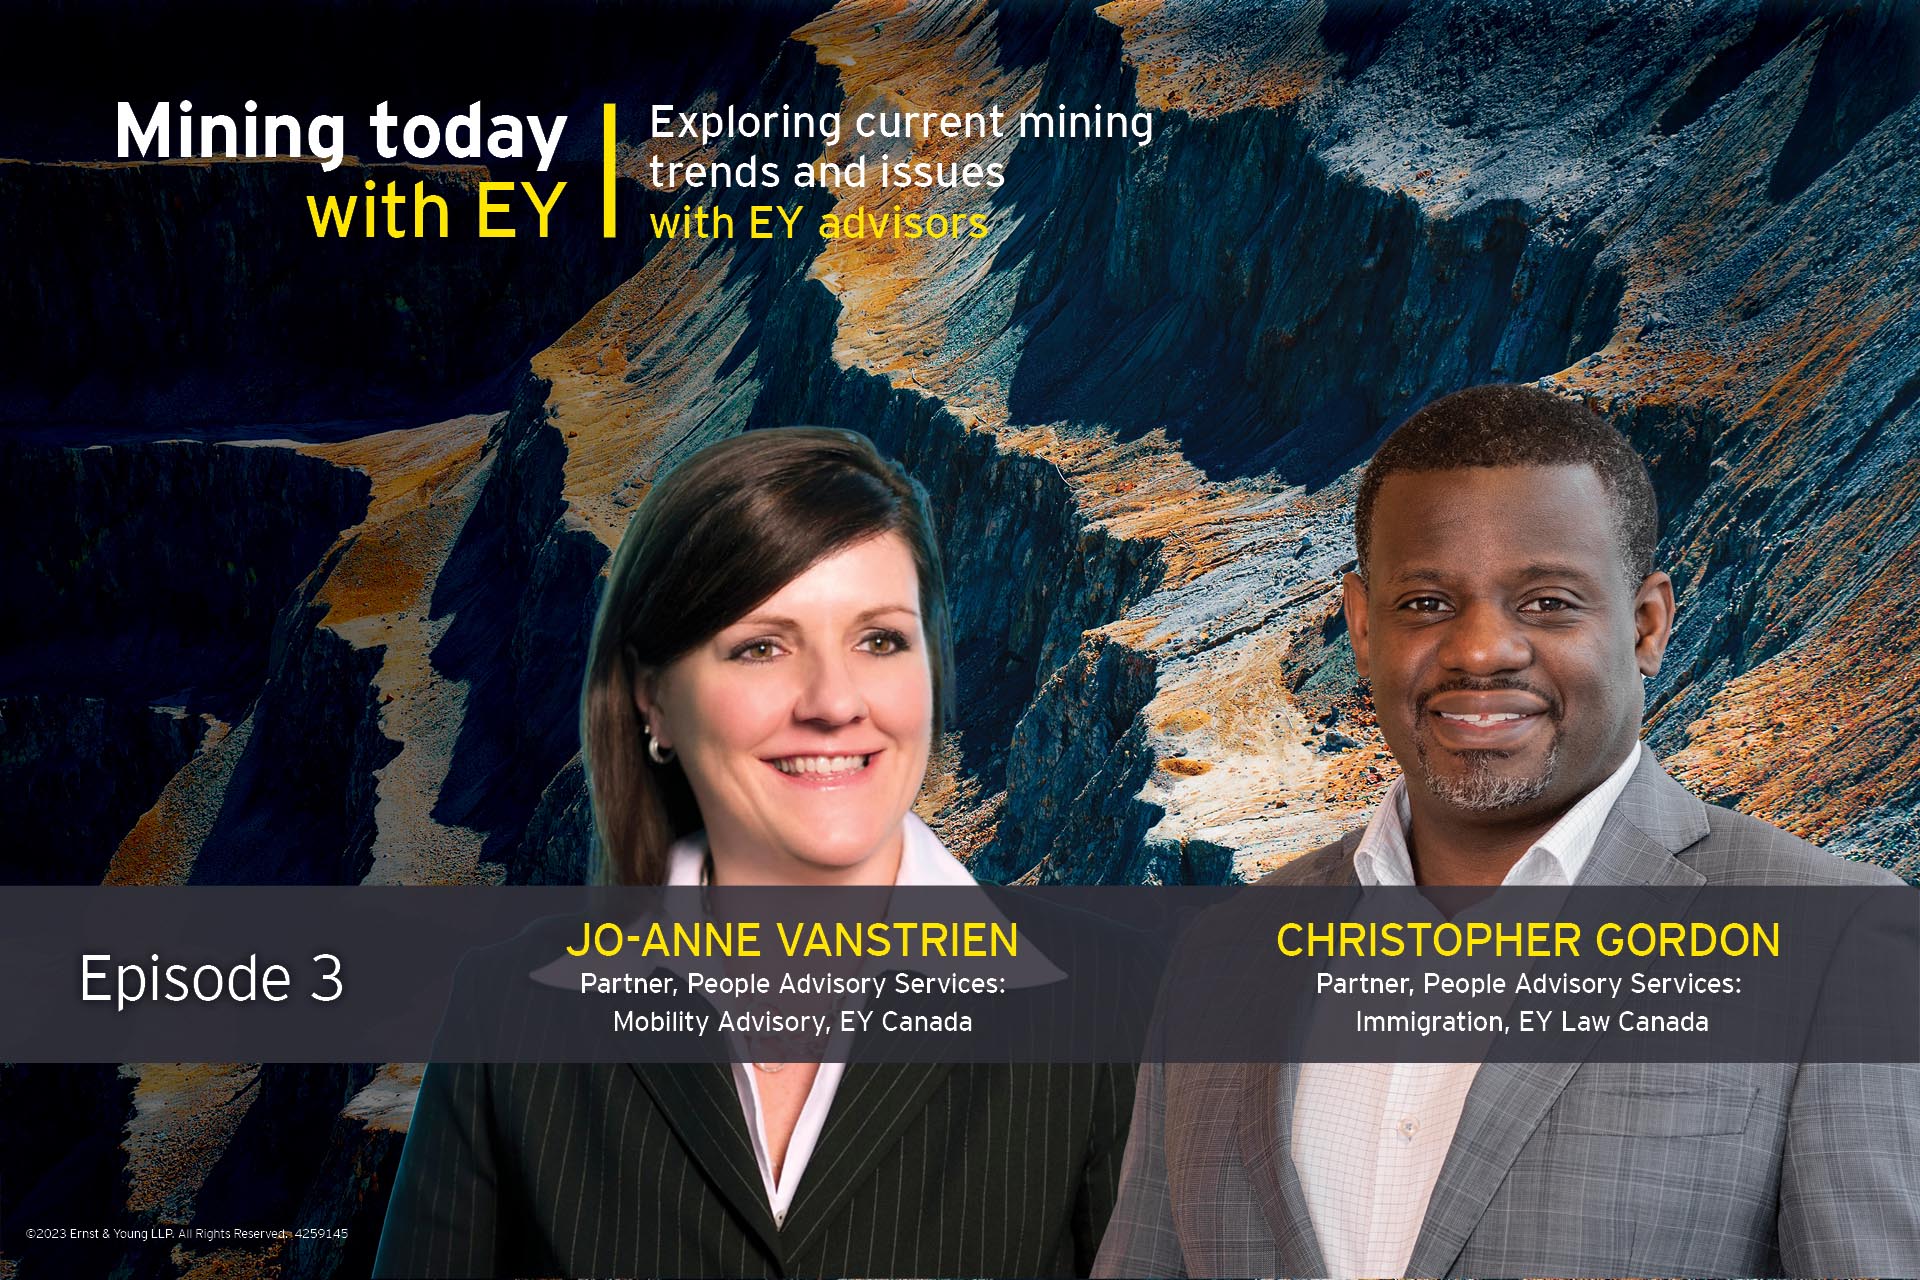 Mining today with EY – EP 3: Global talent mobility in mining and metals